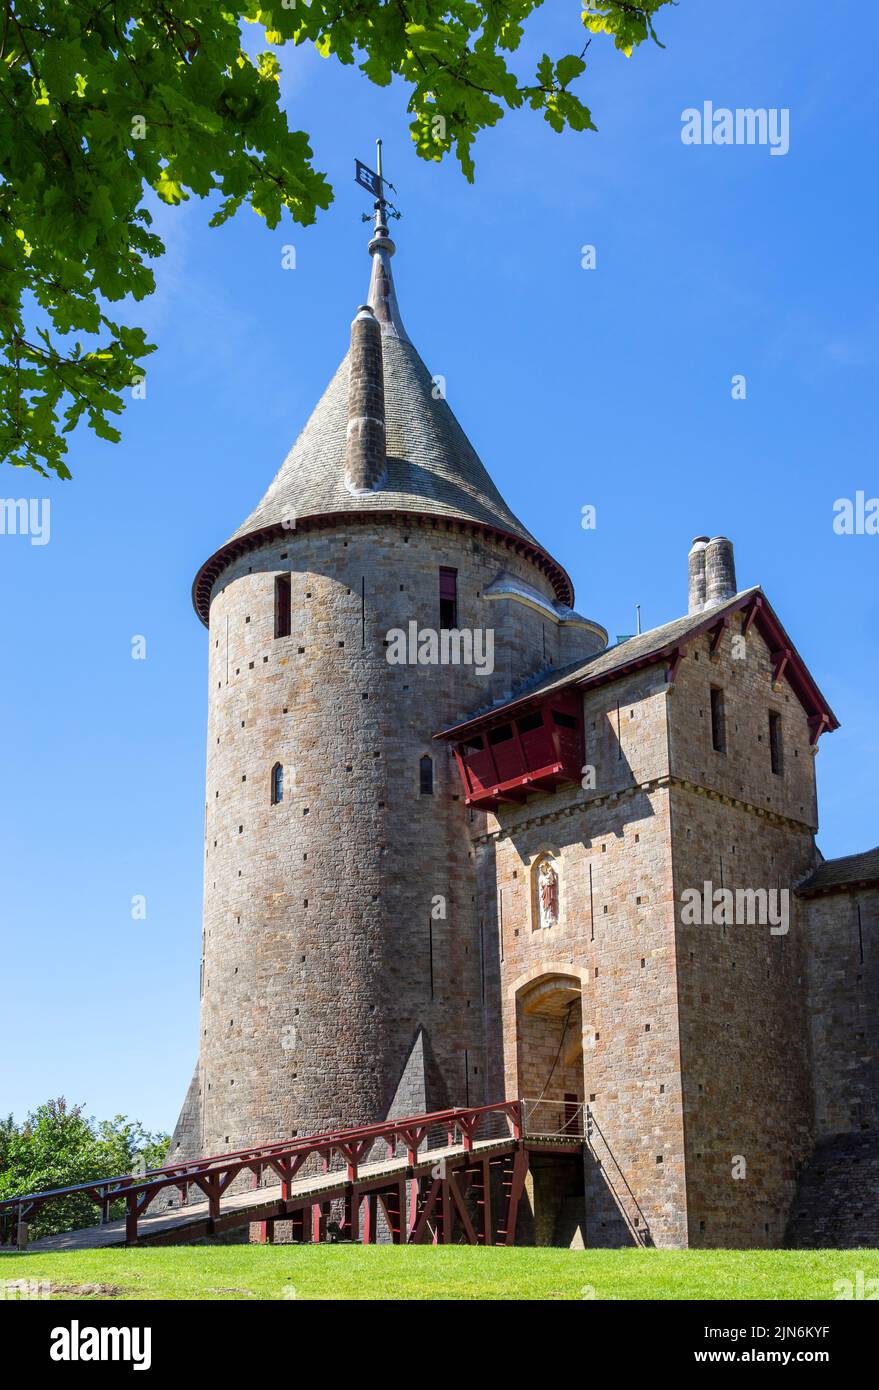 Castell Coch Castle Coch oder Red Castle Tongwynlais Cardiff South Wales UK GB Europa Stockfoto